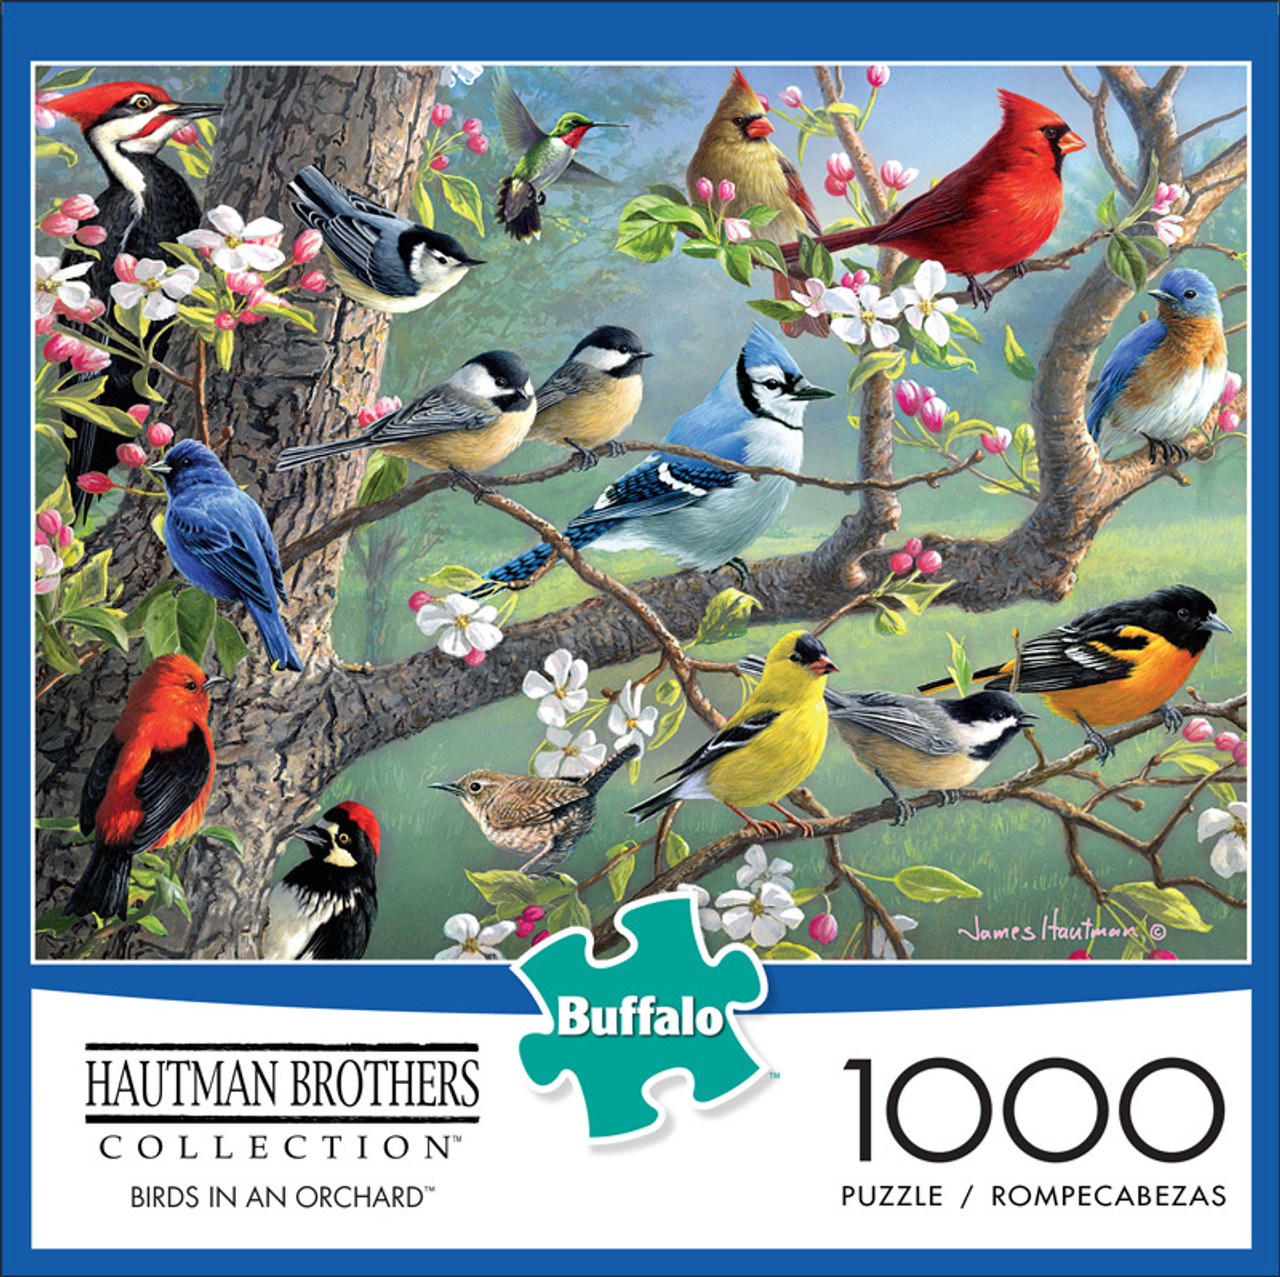 Hautman Brothers Birds in an Orchard 1000 Piece Jigsaw Puzzle